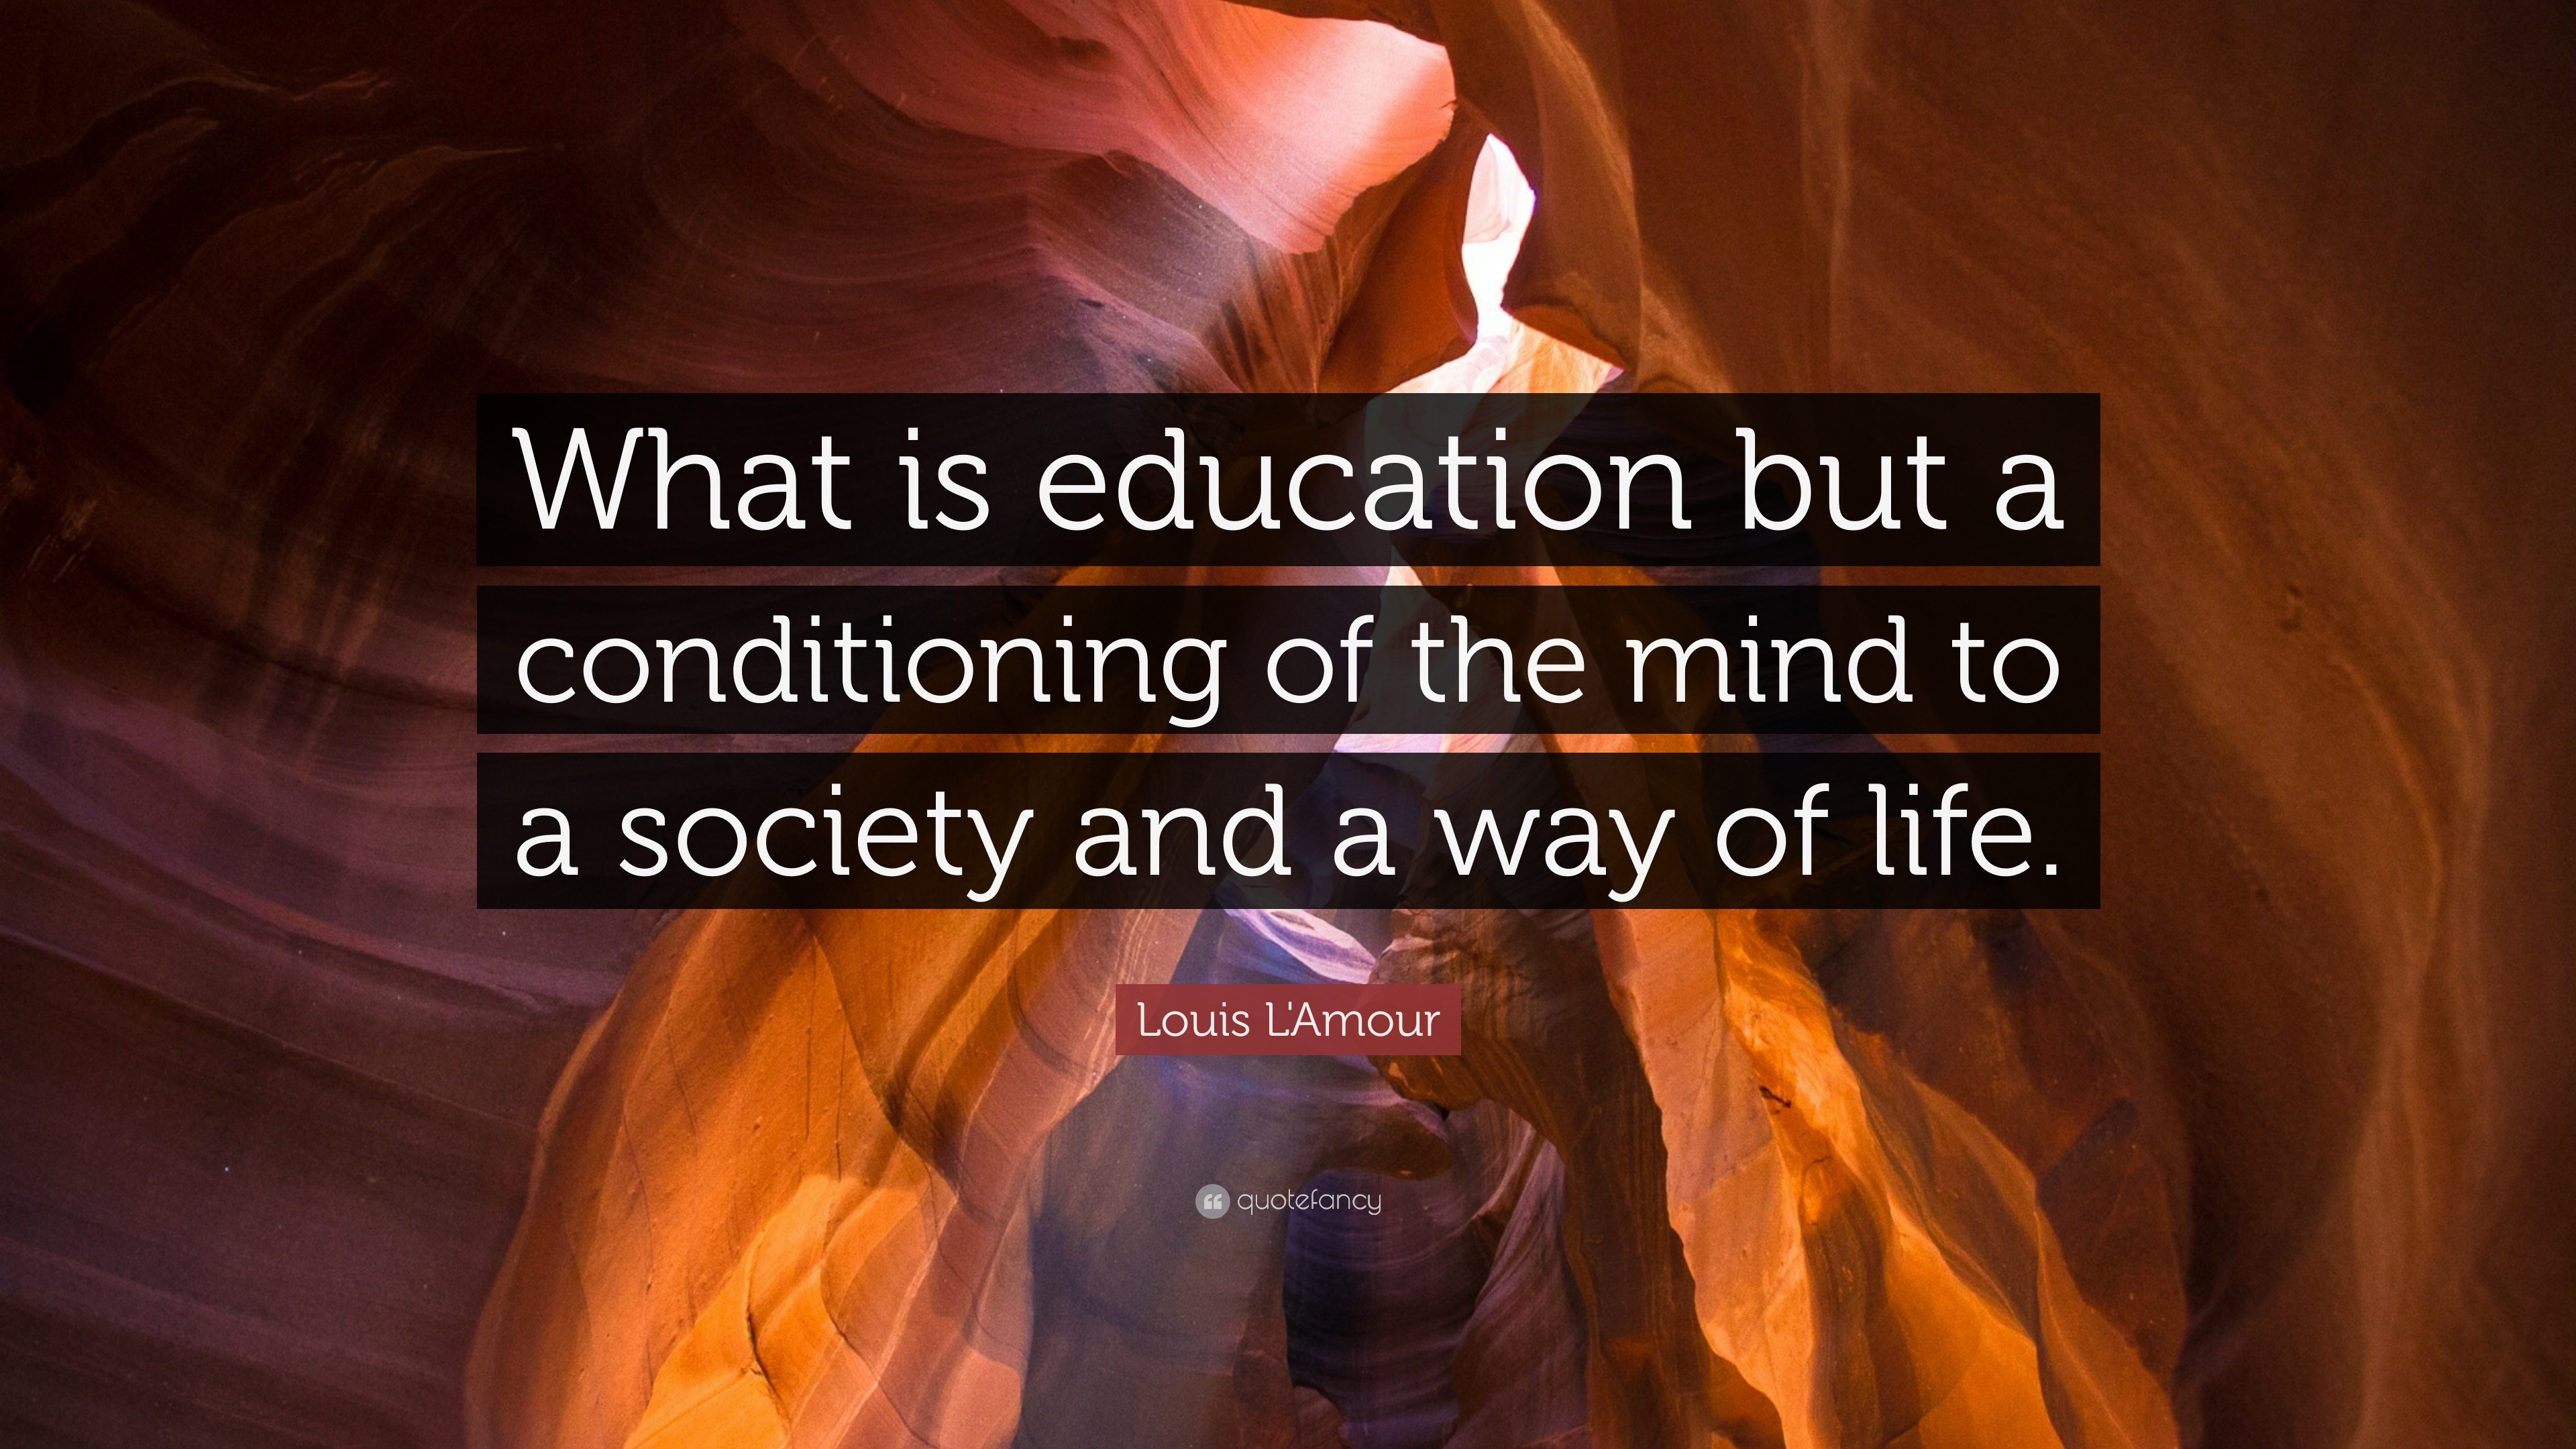 Louis L&#39;Amour Quote: “What is education but a conditioning of the mind to a society and a way of ...